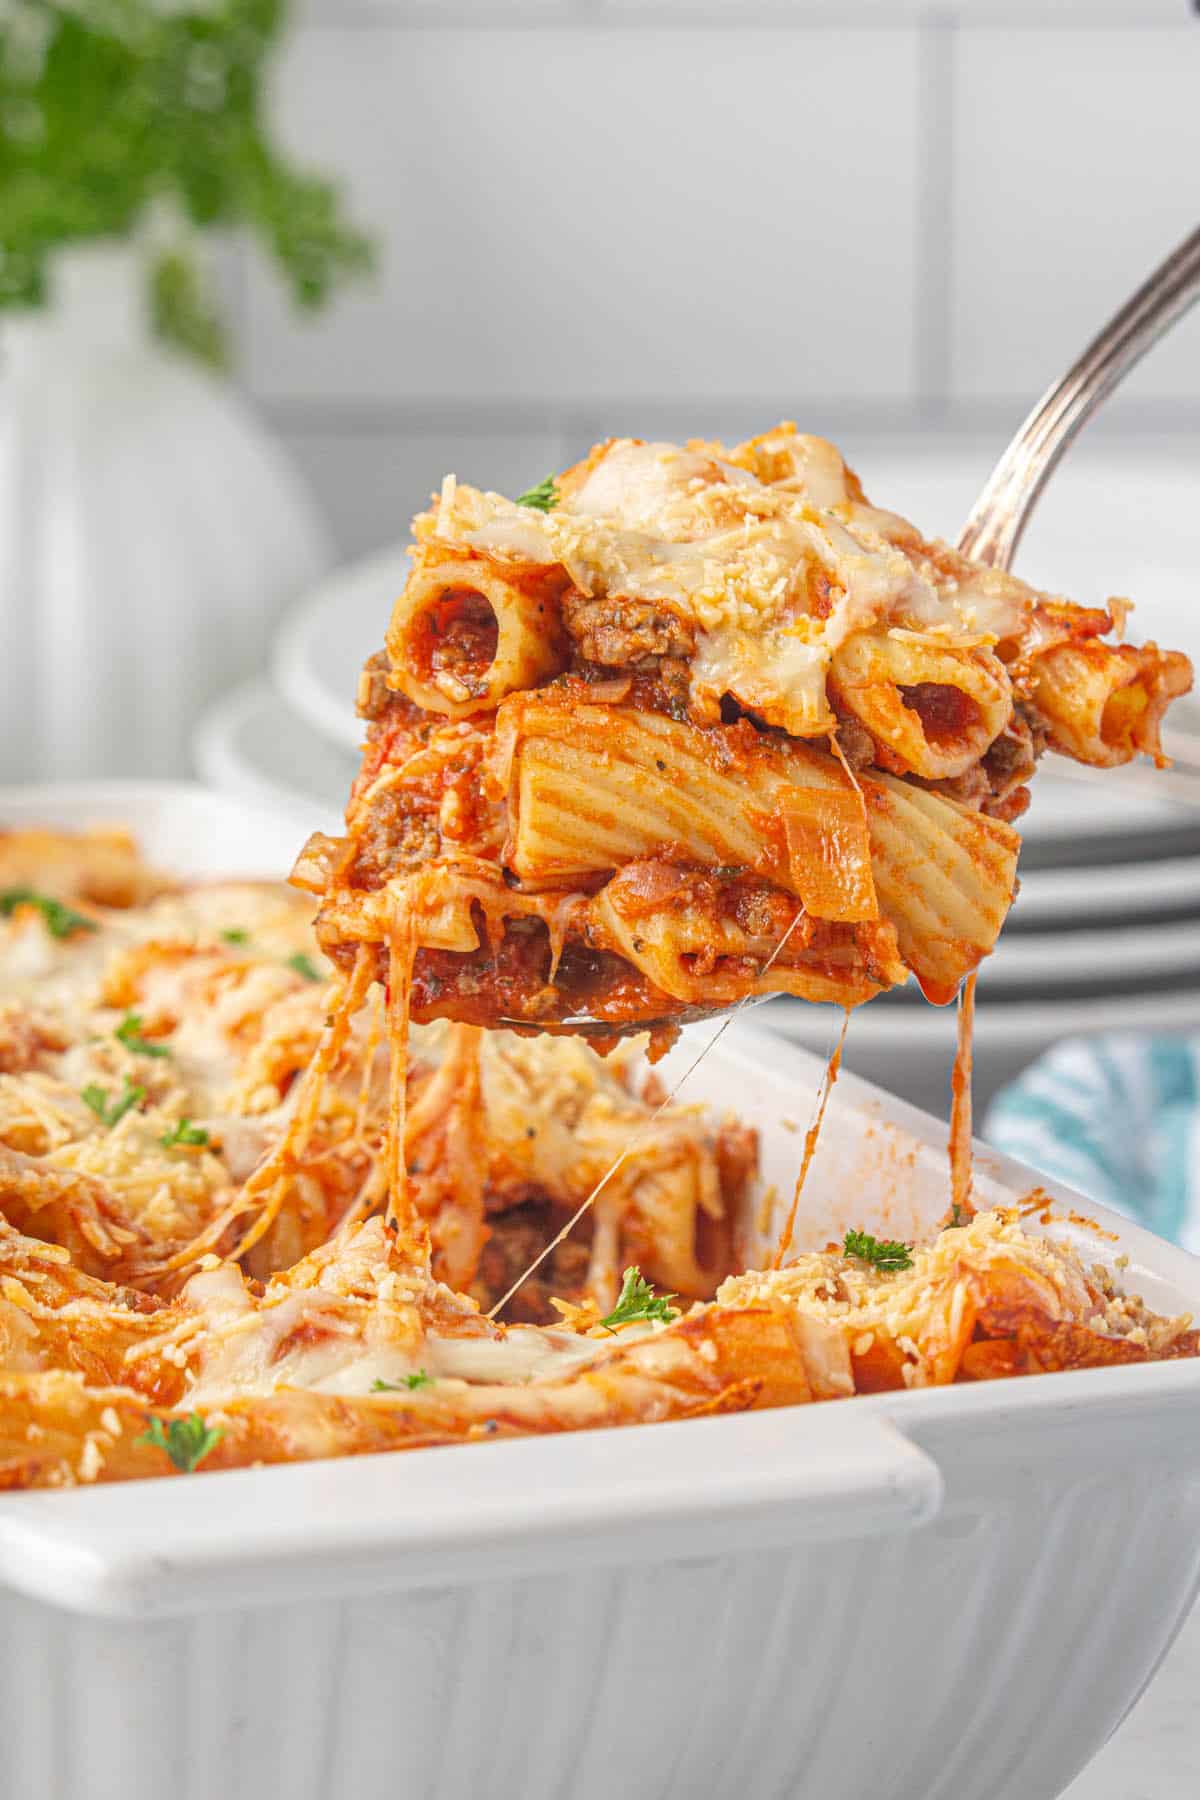 Cheesy pasta casserole in a baking dish with a serving spoon taking a scoop.